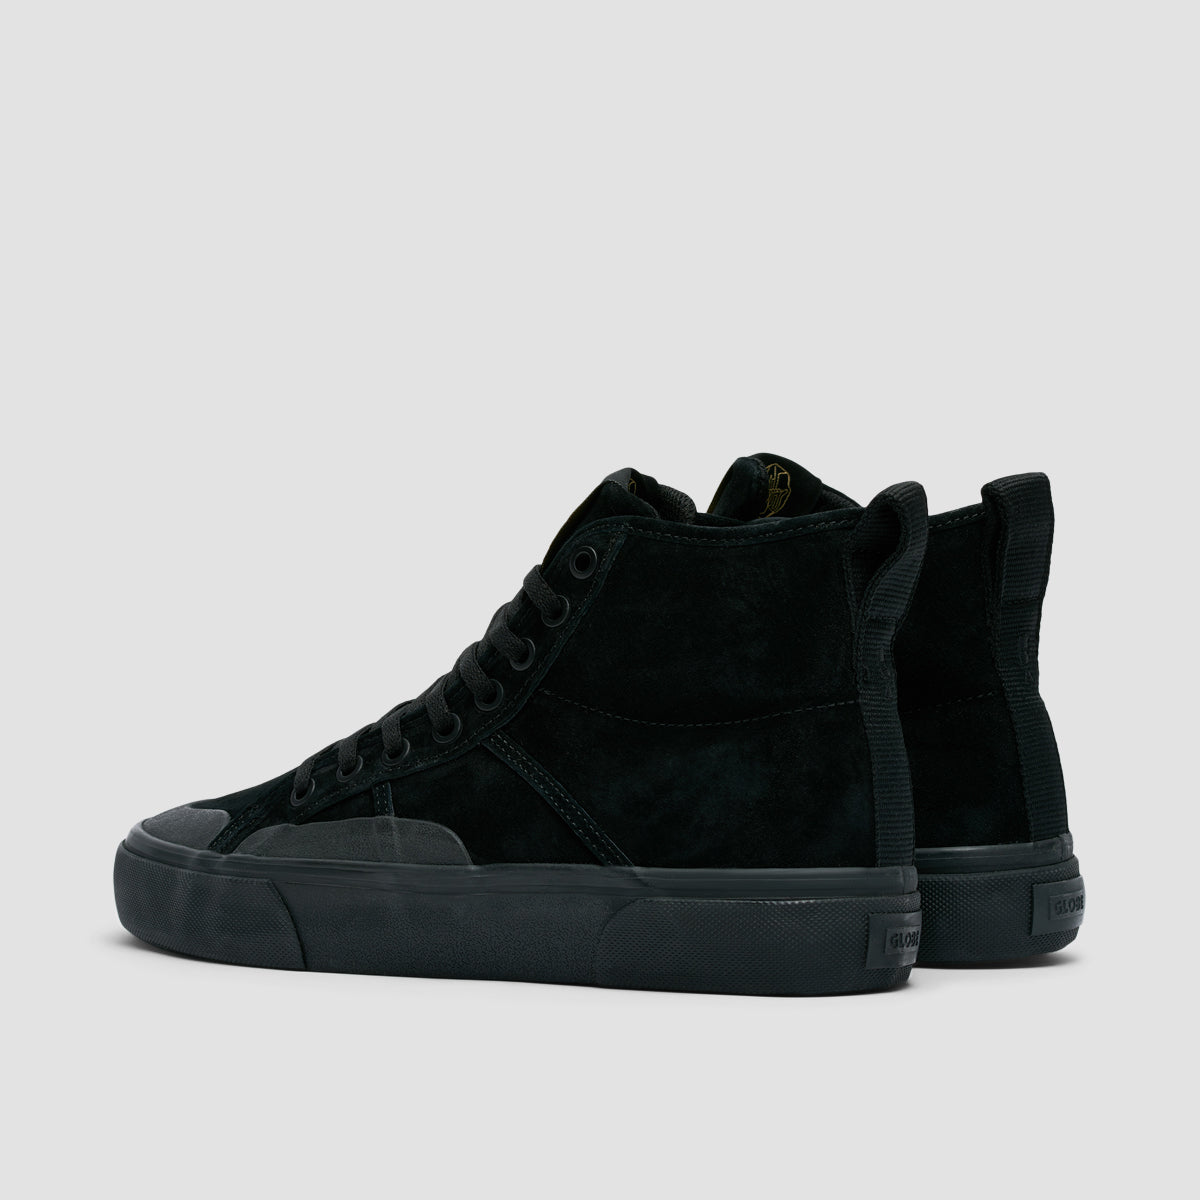 Globe Los Angered II High Top Shoes - Black Wolverine/Montano